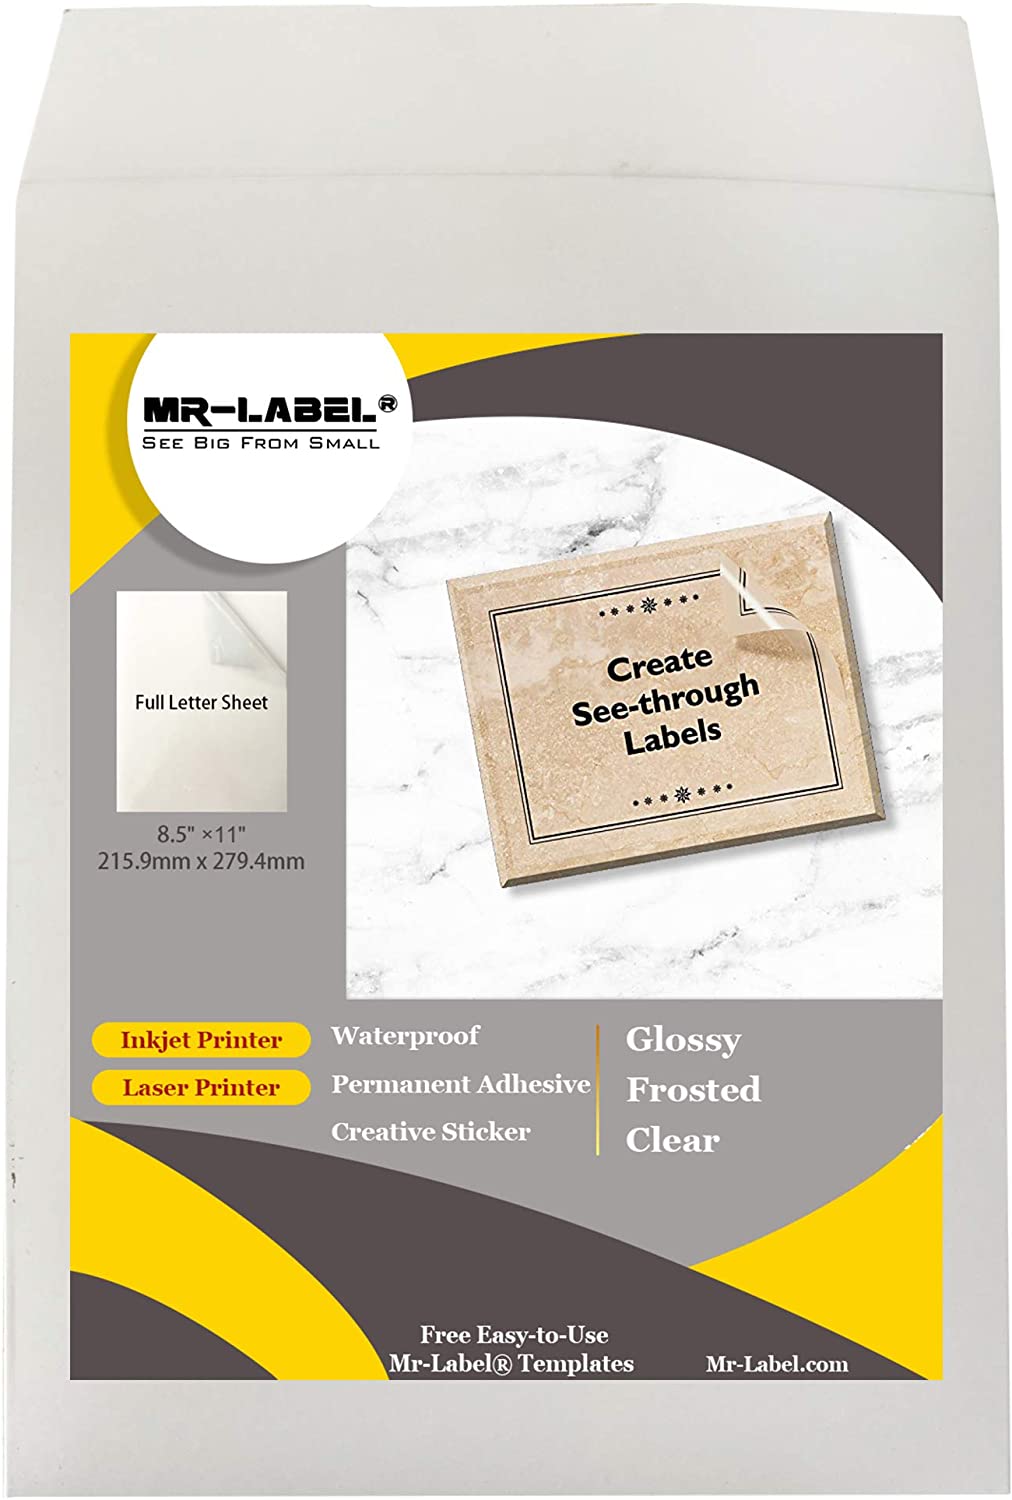 Mr-Label – Glossy Translucent Waterproof Sticker Paper – Permanent Adhesive  Full Letter Sheet Label – Inkjet and Laser Print – for Packaging, Clear  Product Labels